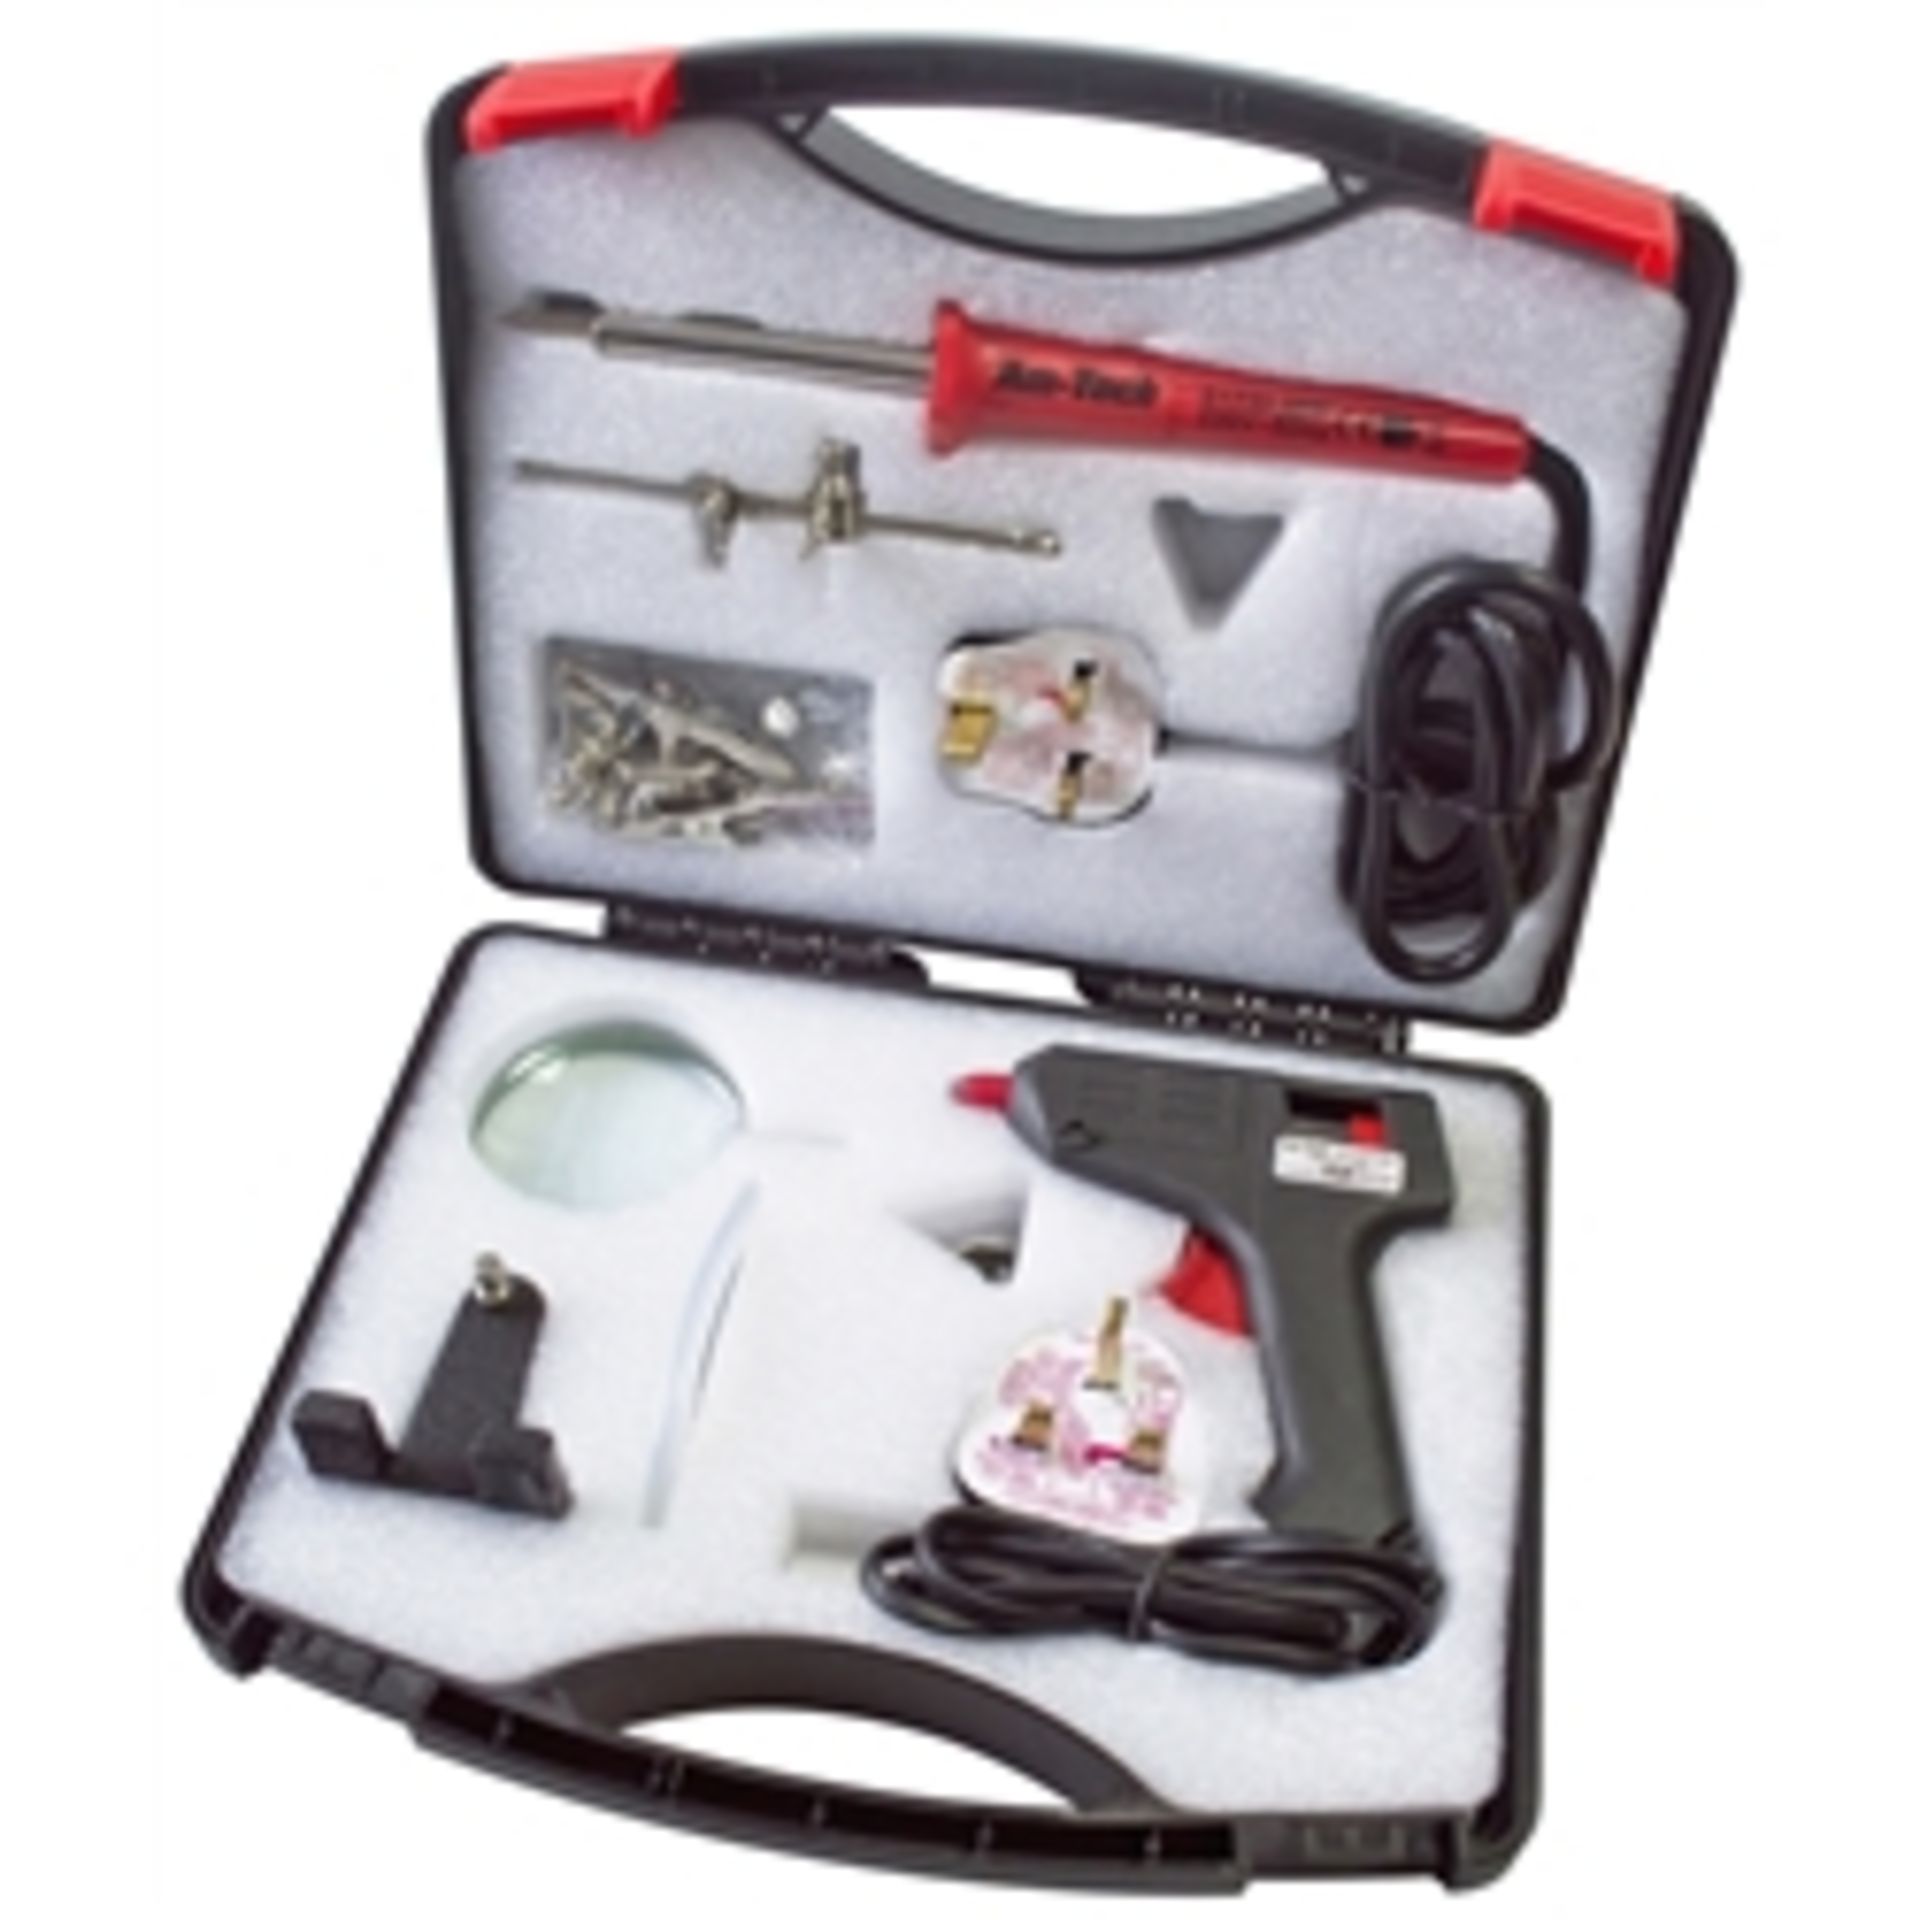 V Brand New Soldering Gun With Accessories In Carry Case